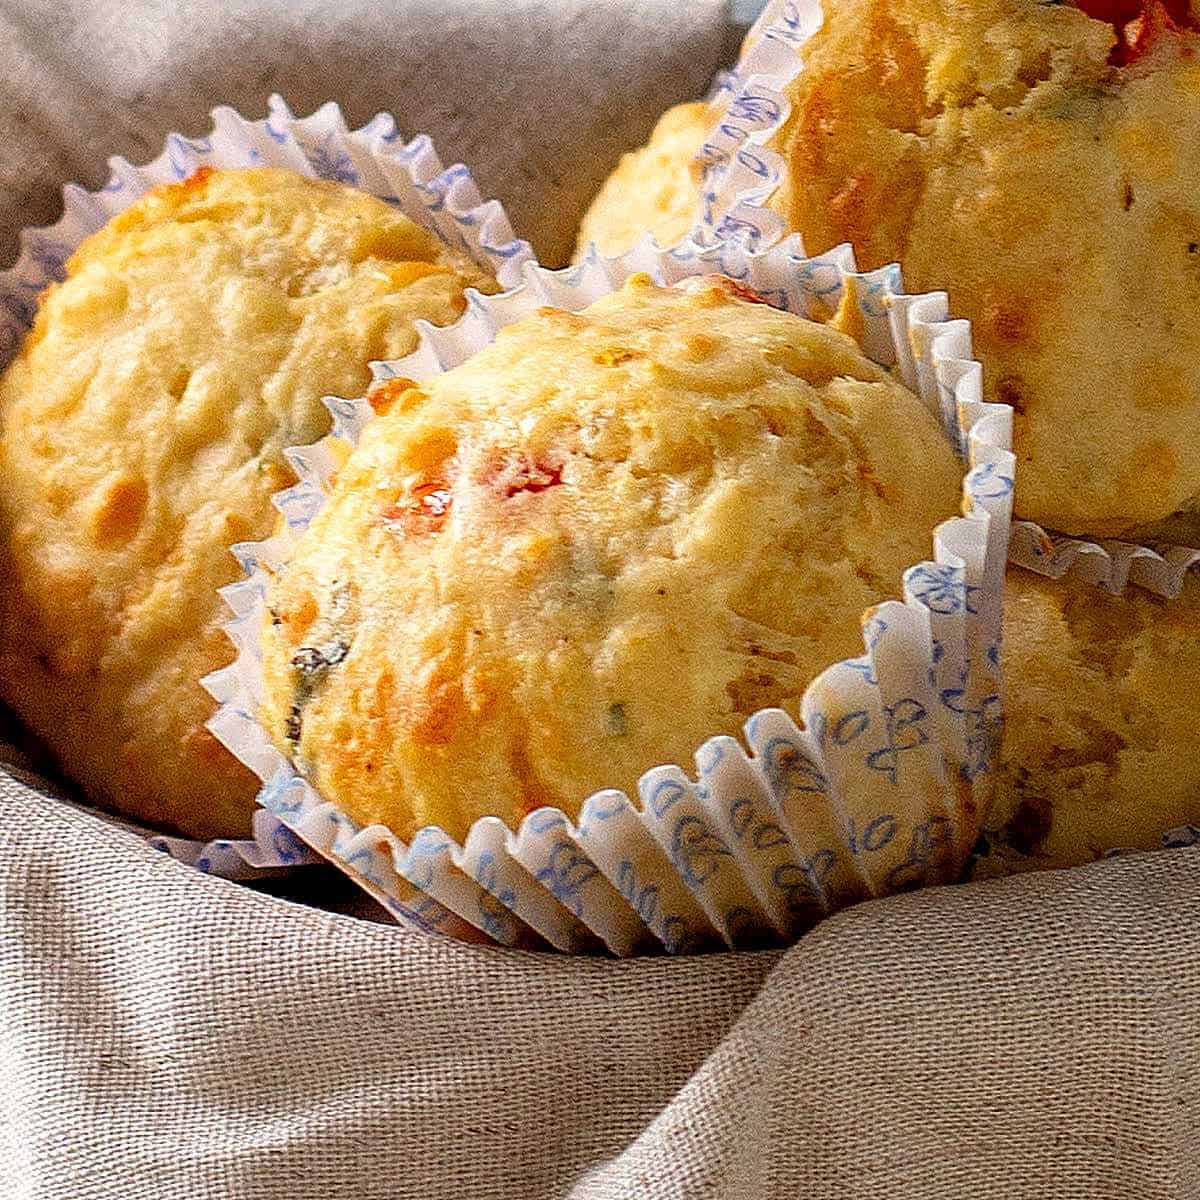 Wired Cup Cafe - Buttery grilled muffins make a perfect Saturday